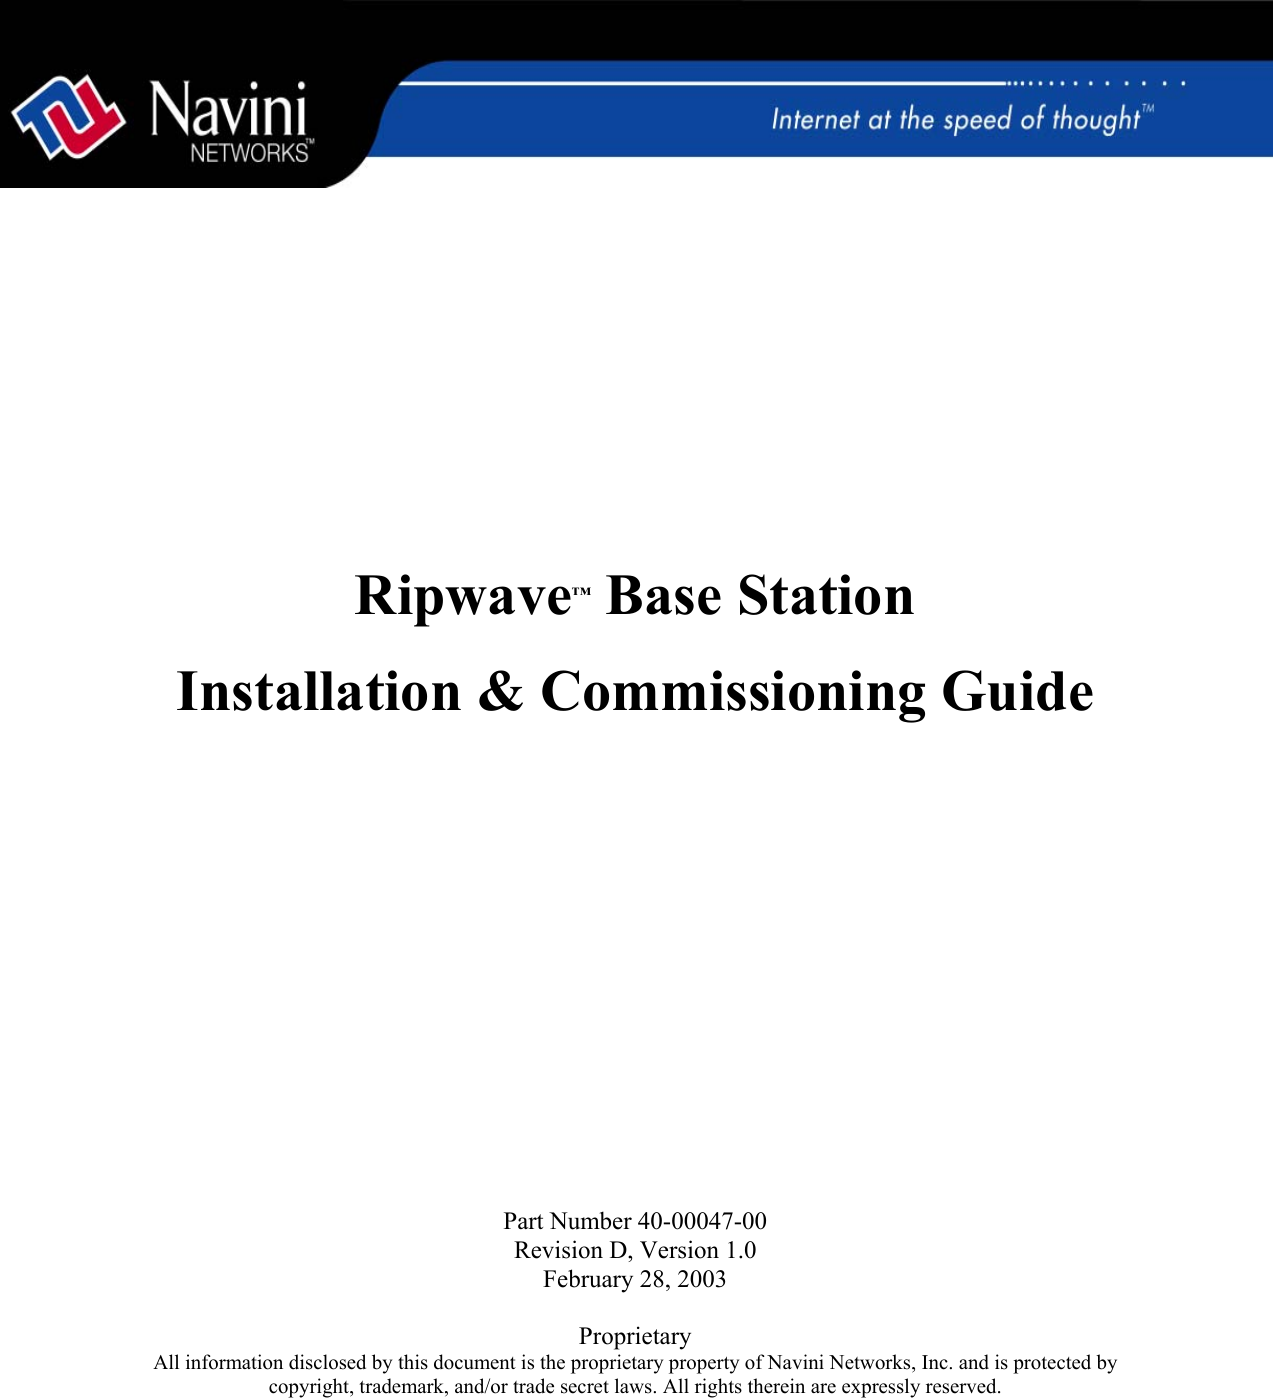               Ripwave™ Base Station   Installation &amp; Commissioning Guide                   Part Number 40-00047-00 Revision D, Version 1.0 February 28, 2003  Proprietary All information disclosed by this document is the proprietary property of Navini Networks, Inc. and is protected by copyright, trademark, and/or trade secret laws. All rights therein are expressly reserved. 